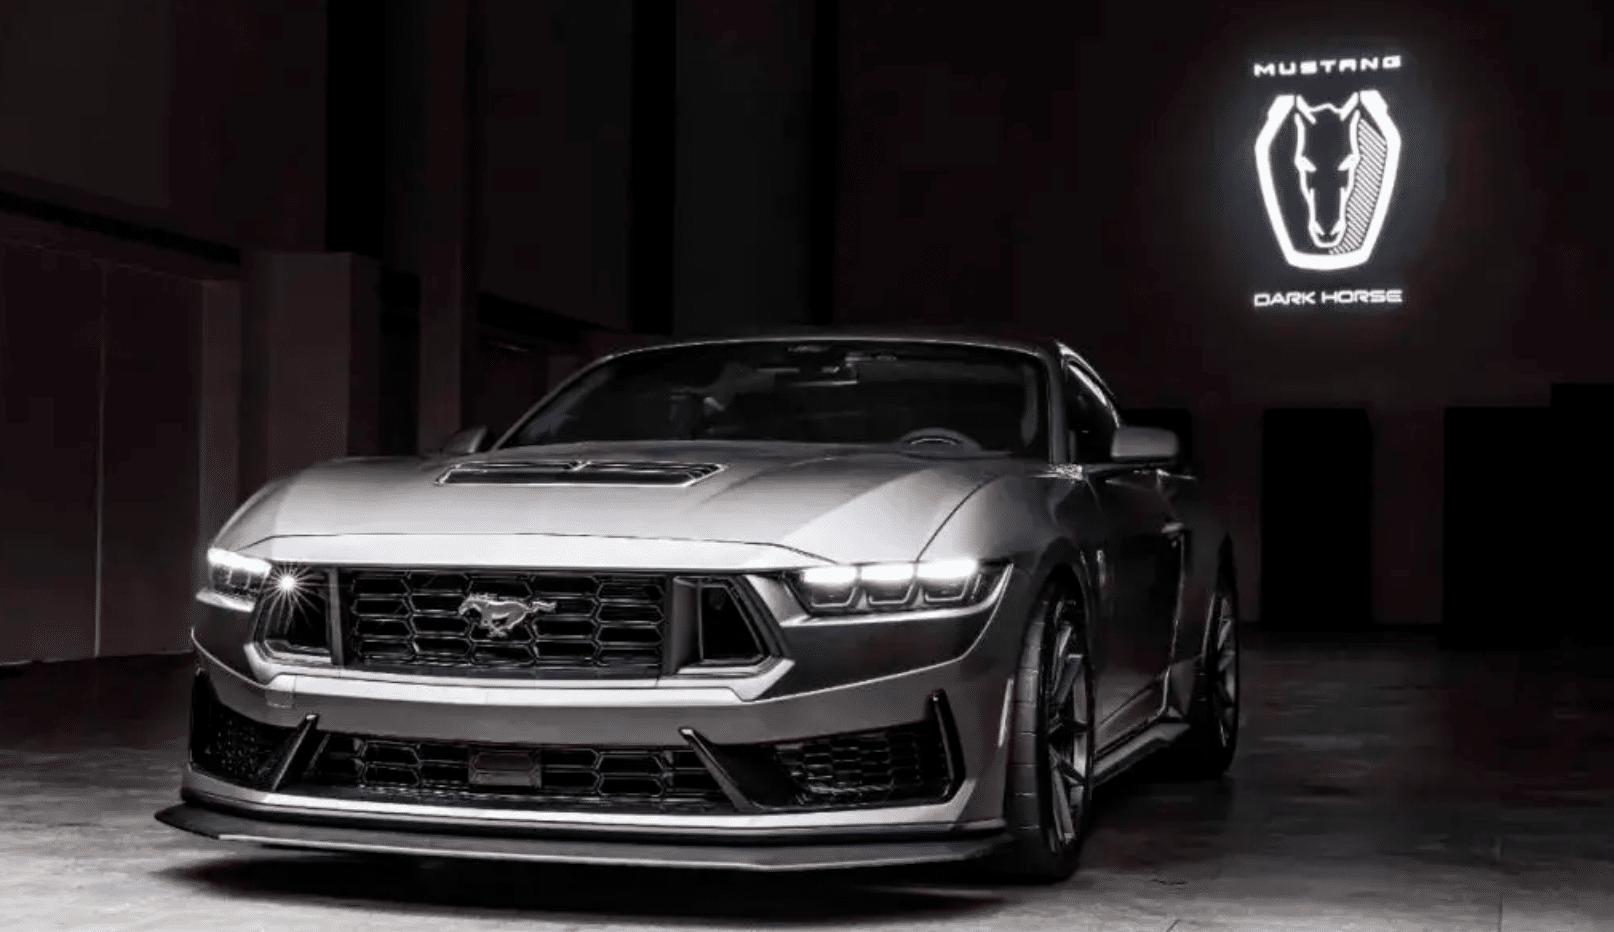 Legendary American muscle car to return to Chinese stores after four years